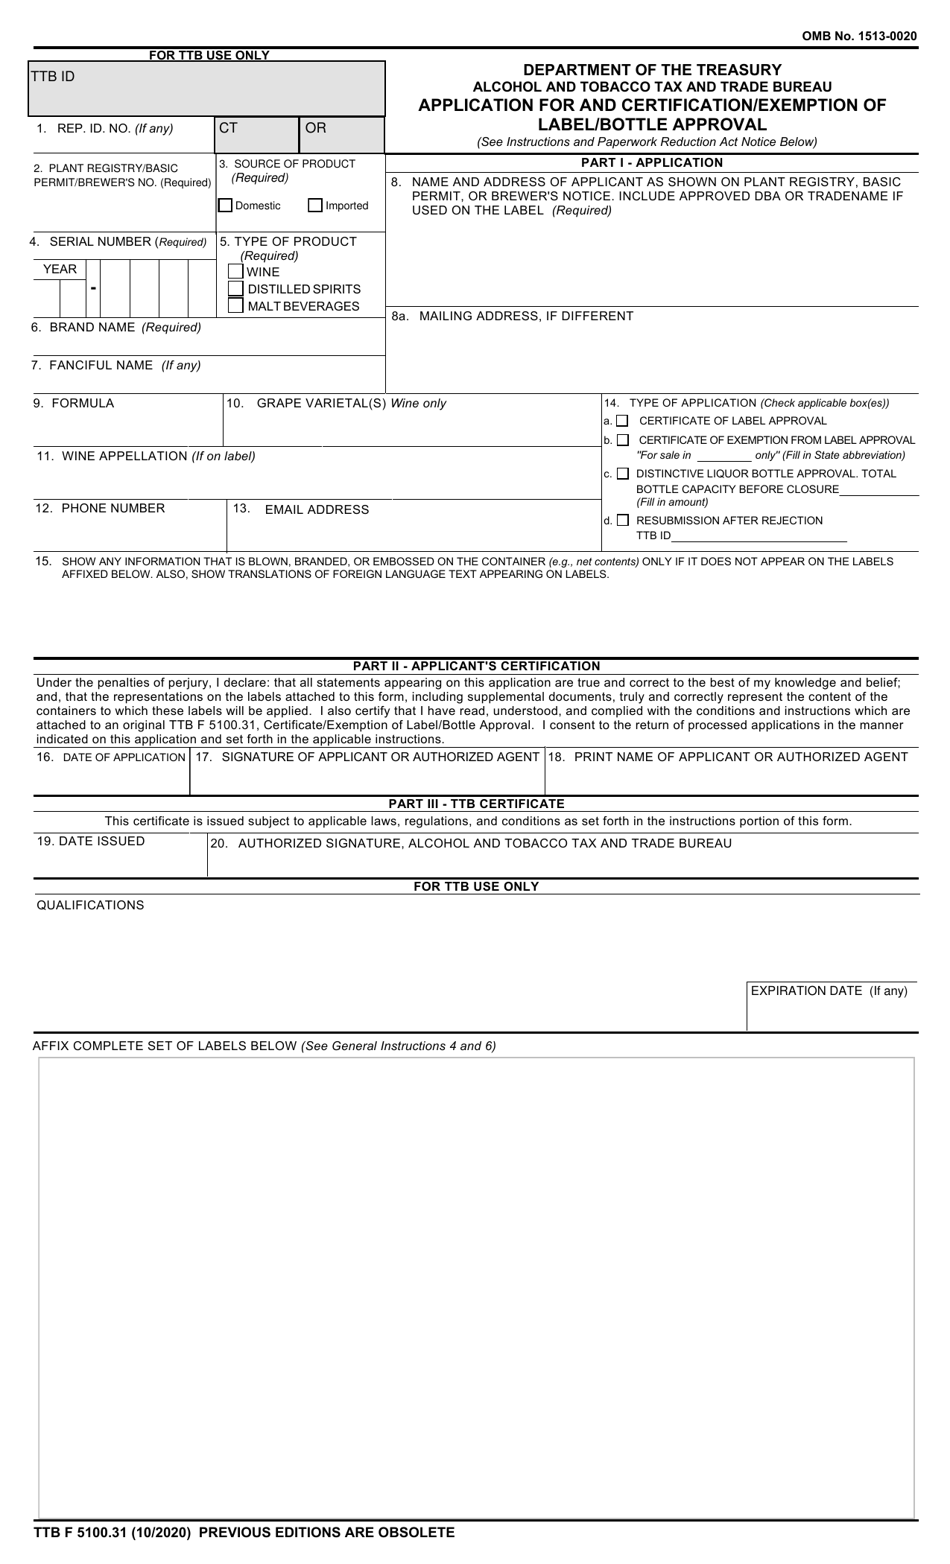 Form TTB F5100.31 Application for and Certification / Exemption of Label / Bottle Approval, Page 1